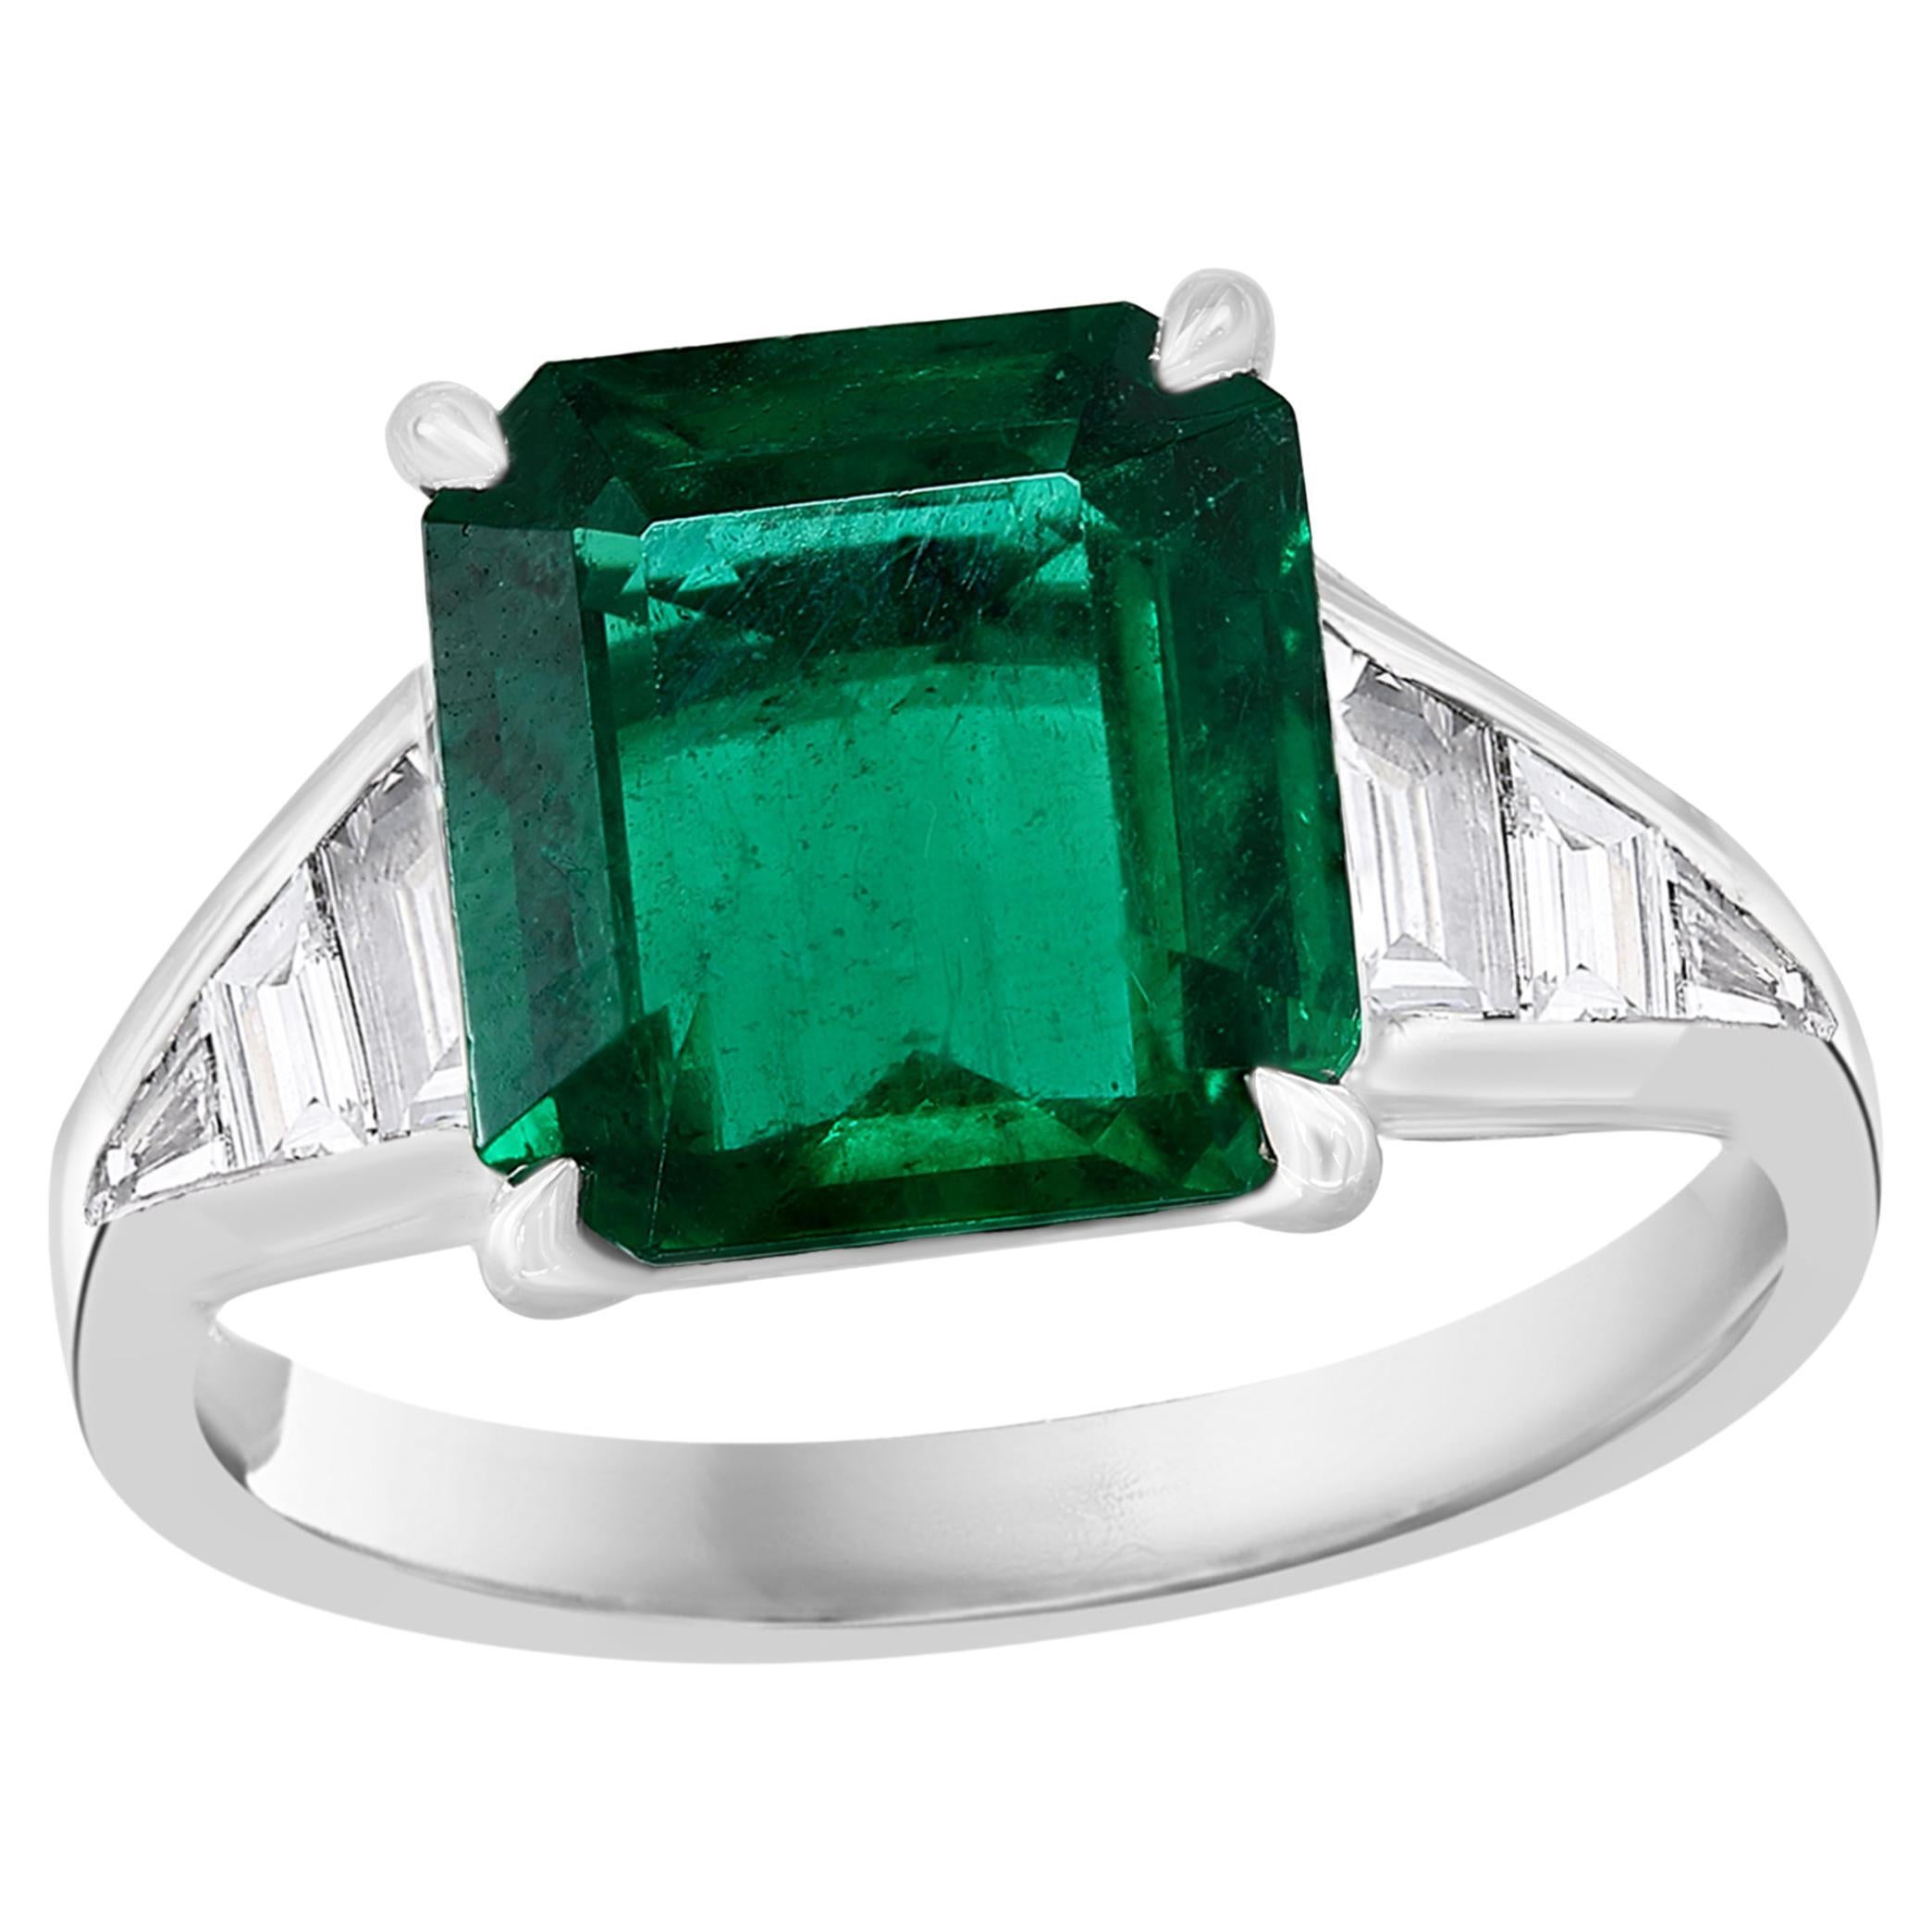 4.03 Carat Emerald Cut Emerald and Diamond Engagement Ring in Platinum For Sale